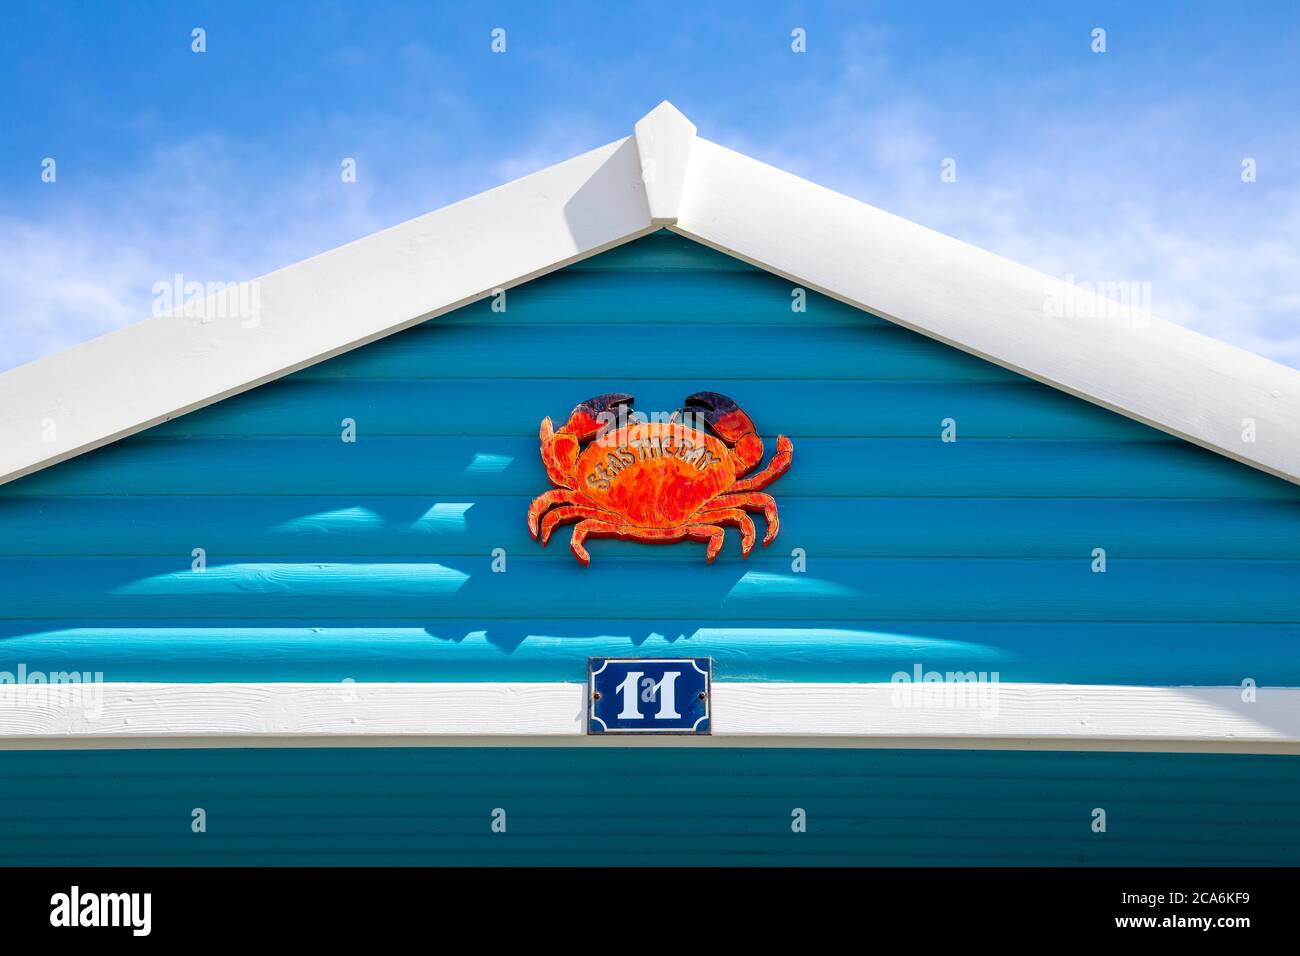 Blue exterior of a beach hut with a crab sign 'Seas the day' in West Beach, Whitstable, UK Stock Photo